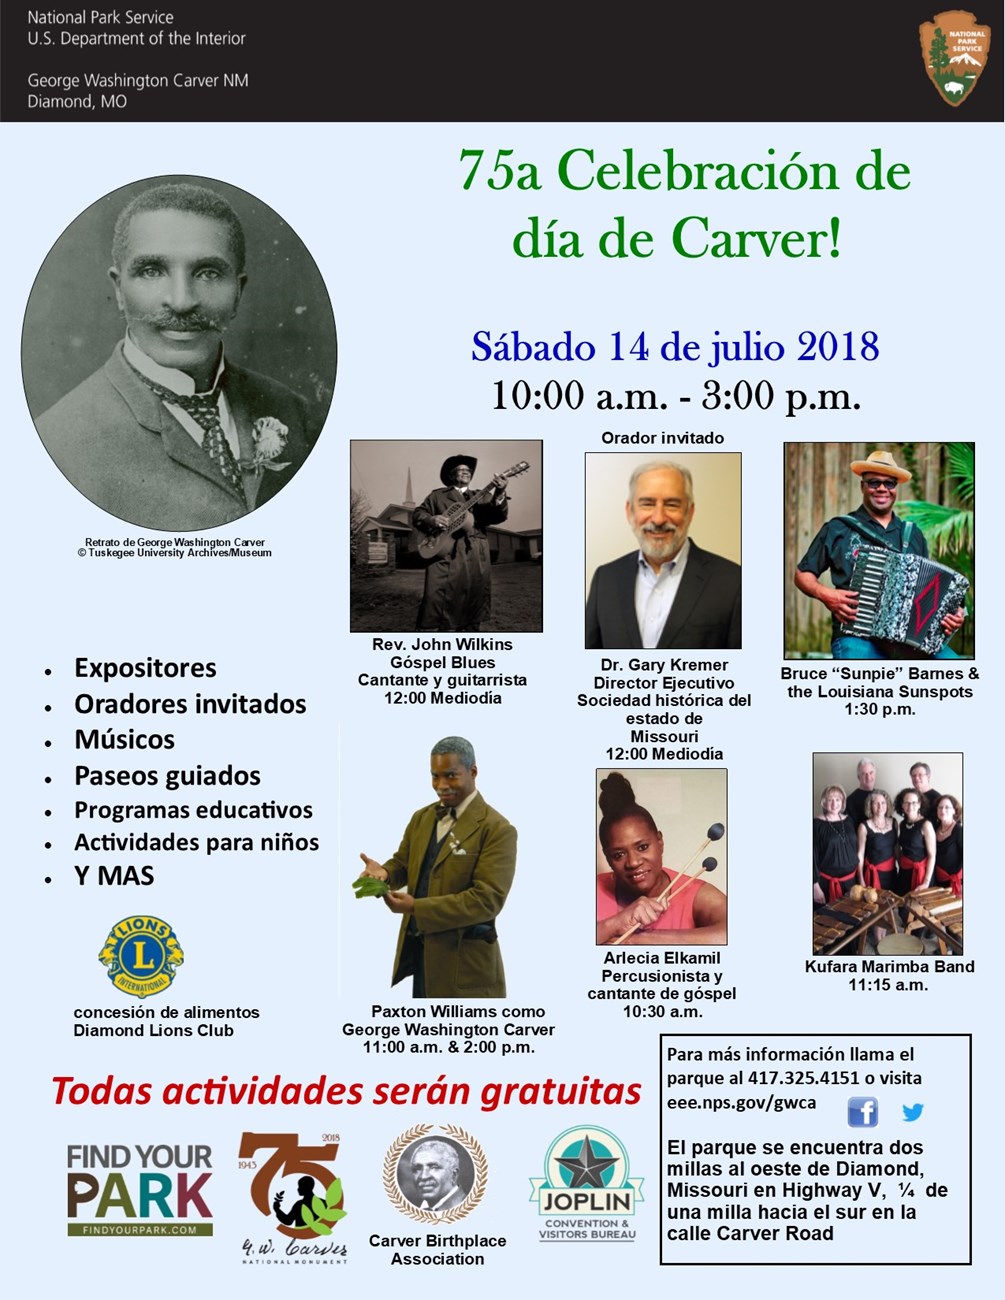 The image is for an upcoming park special event: Carver Day 2018. The information is in Spanish with photographs of guest speakers and performers.